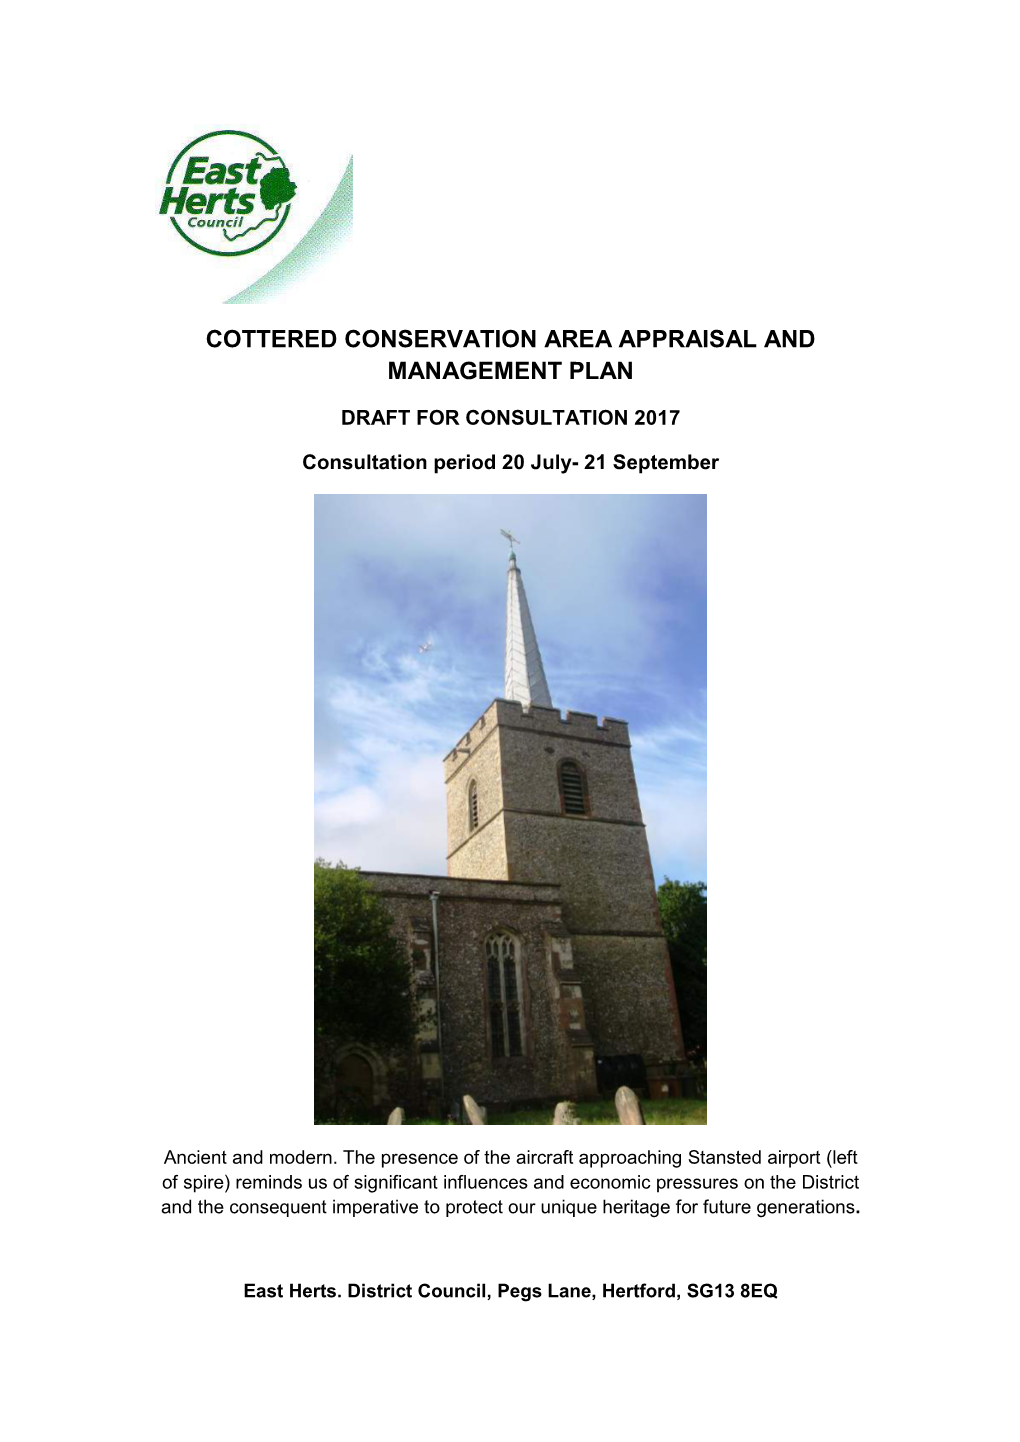 Cottered Conservation Area Appraisal and Management Plan